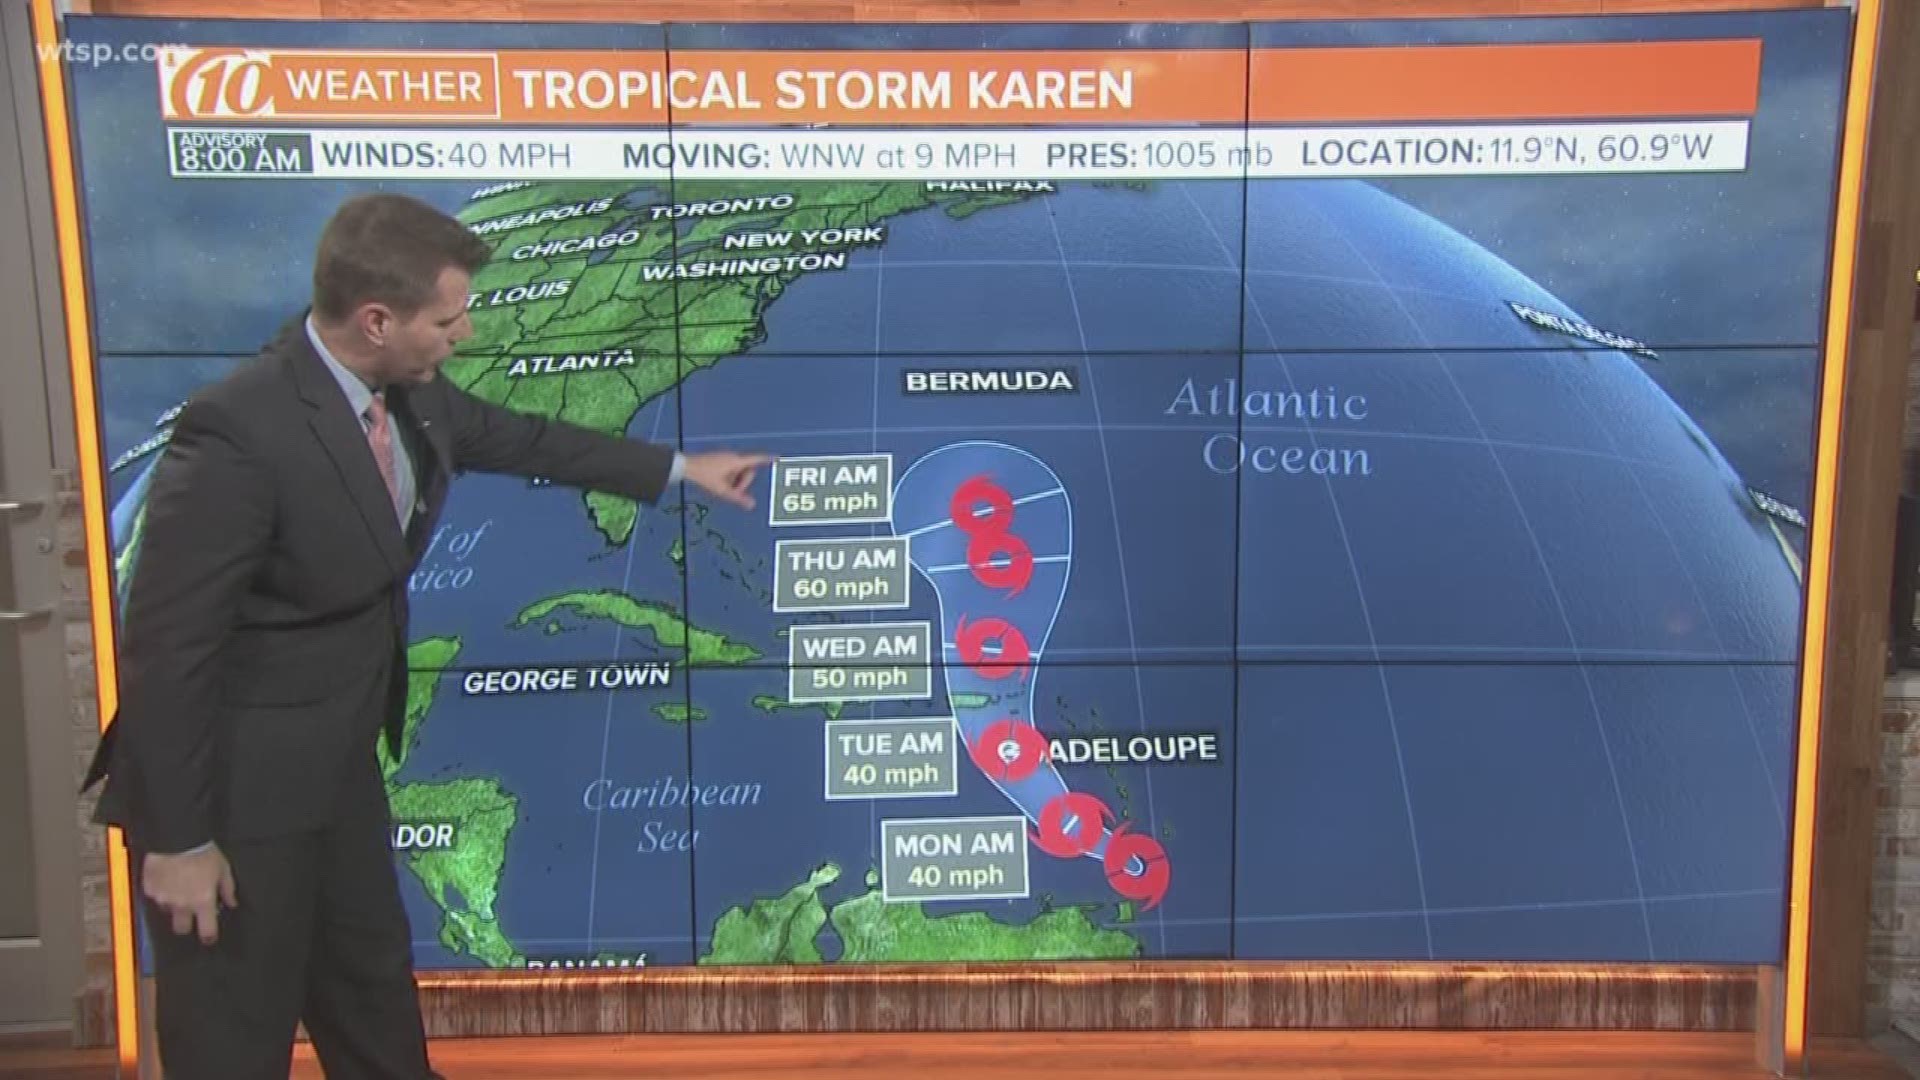 The 11th named storm of the Atlantic hurricane season developed overnight just east of the Windward Islands: Tropical Storm Karen.